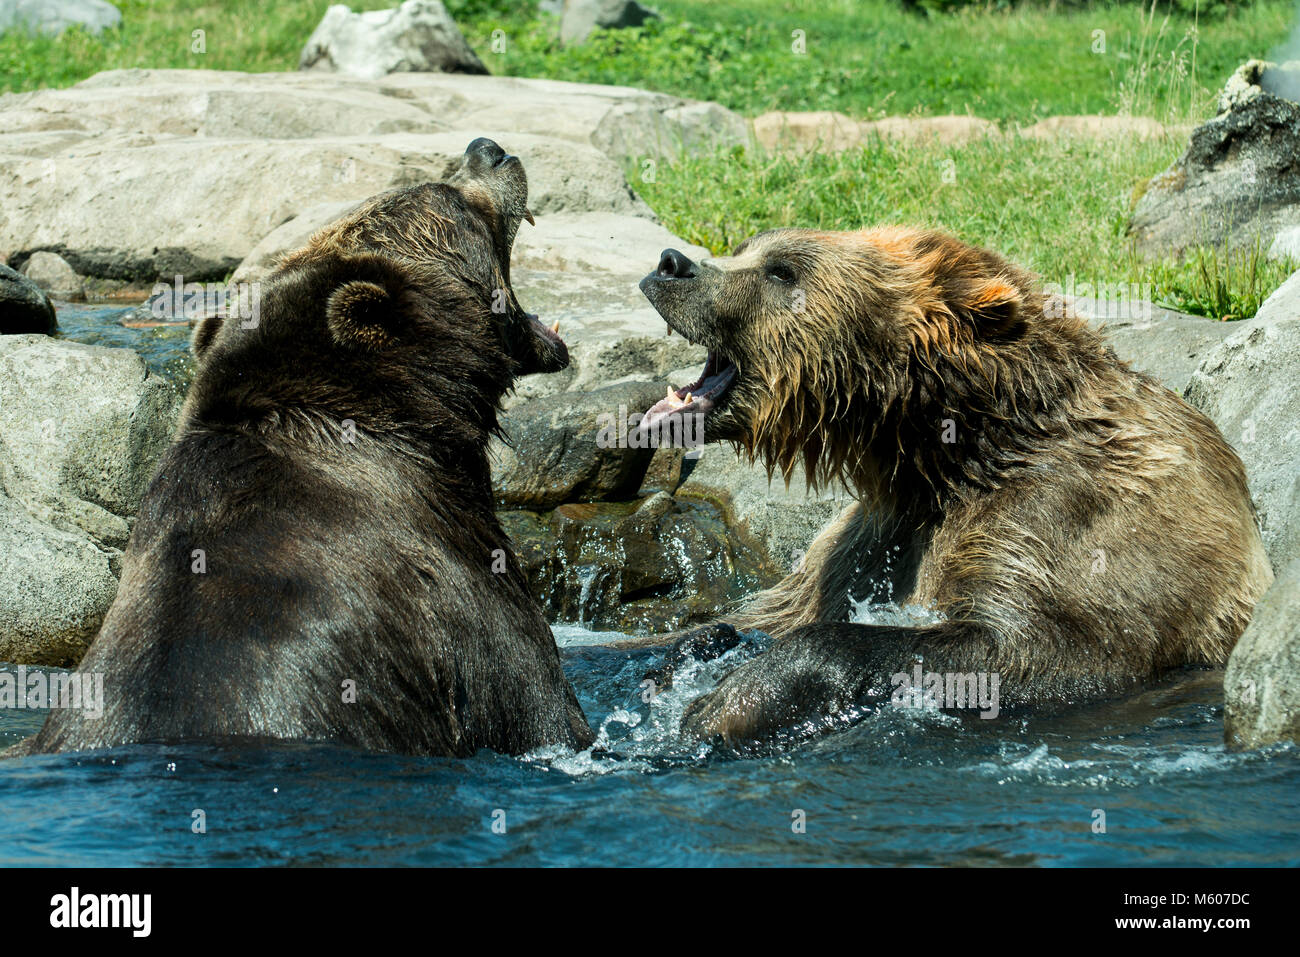 Apple Valley, Minnesota. Minnesota Zoo.  Russia's Grizzly coast exhibit. Brown Bear aka Grizzly, Ursus arctos. Bears are probably fighting to show the Stock Photo